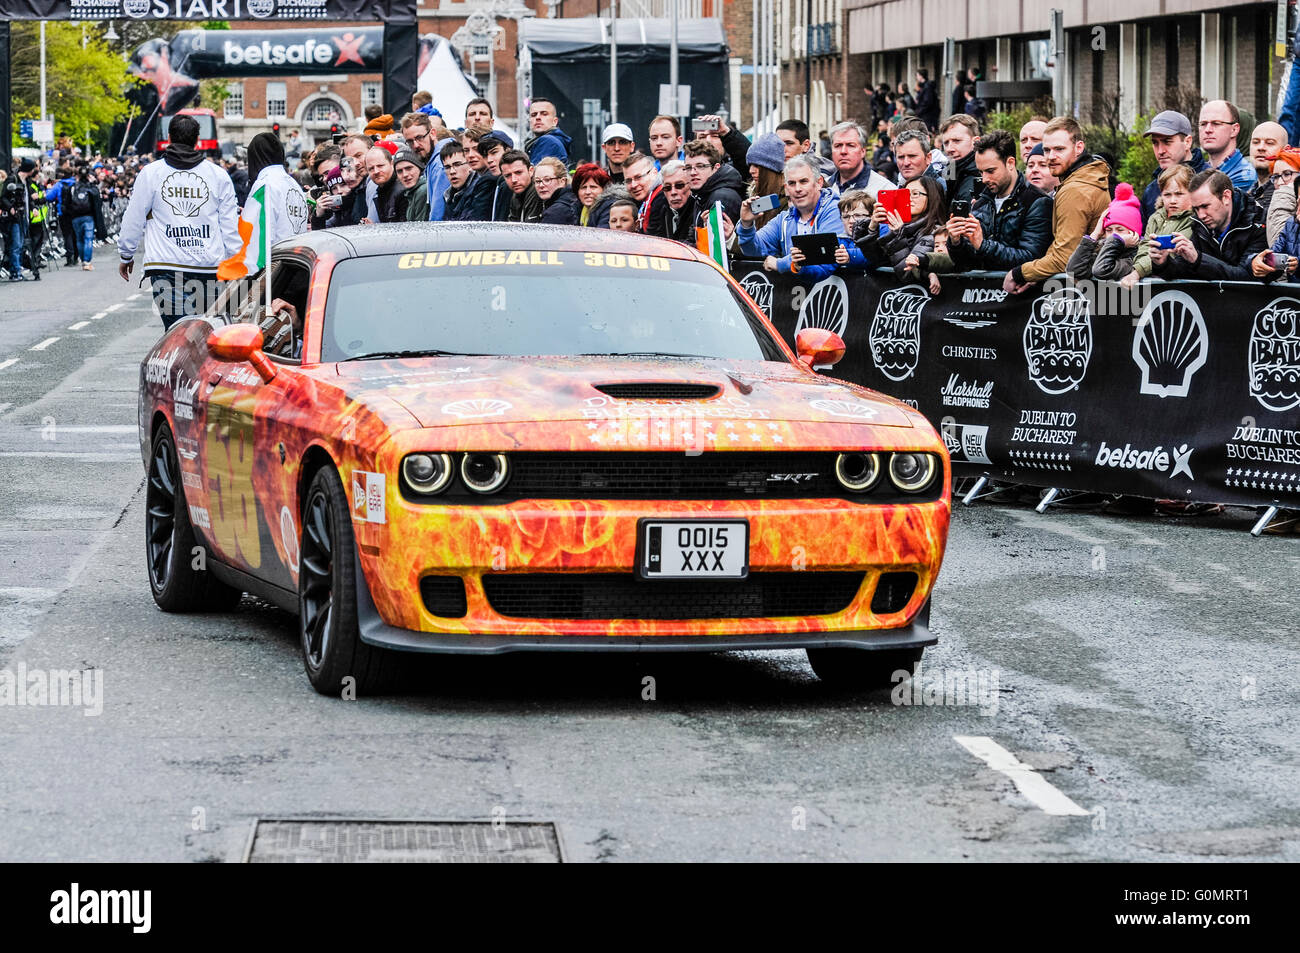 DUBLIN, IRELAND. MAY 01 2016 - A Dodge Charger starts off on a 6 day drive to Bucharest from Dublin as part of the Gumball 3000 rally. Stock Photo